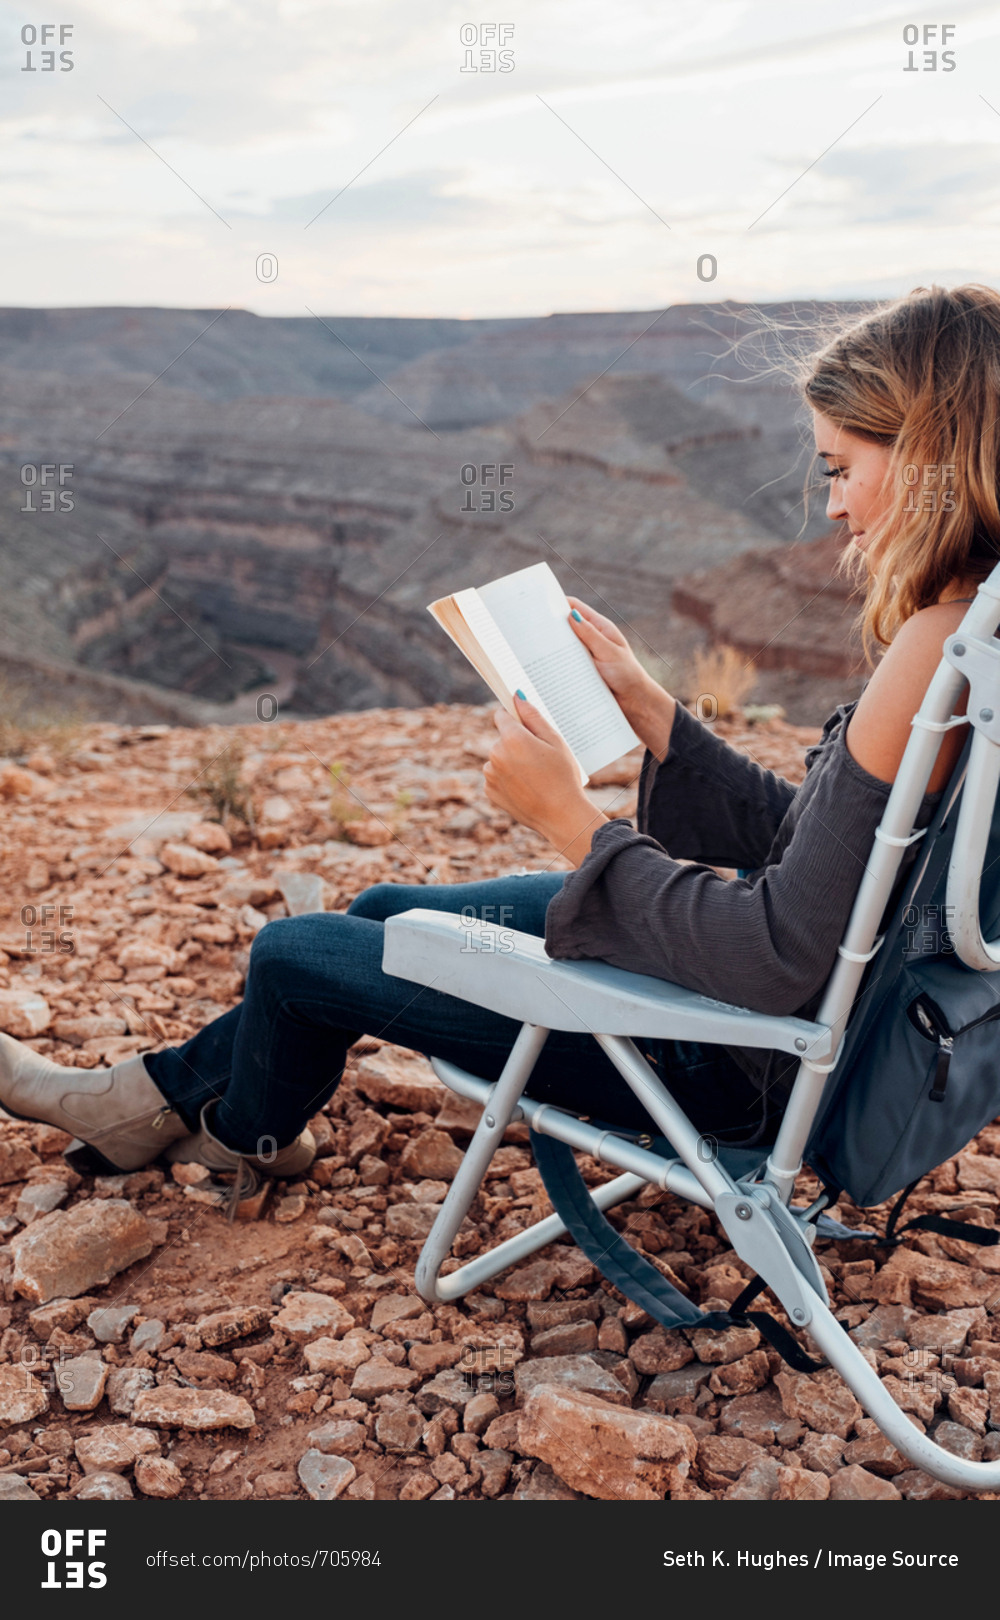 Young woman in remote setting, sitting on camping chair, reading book, Mexican Hat, Utah, USA